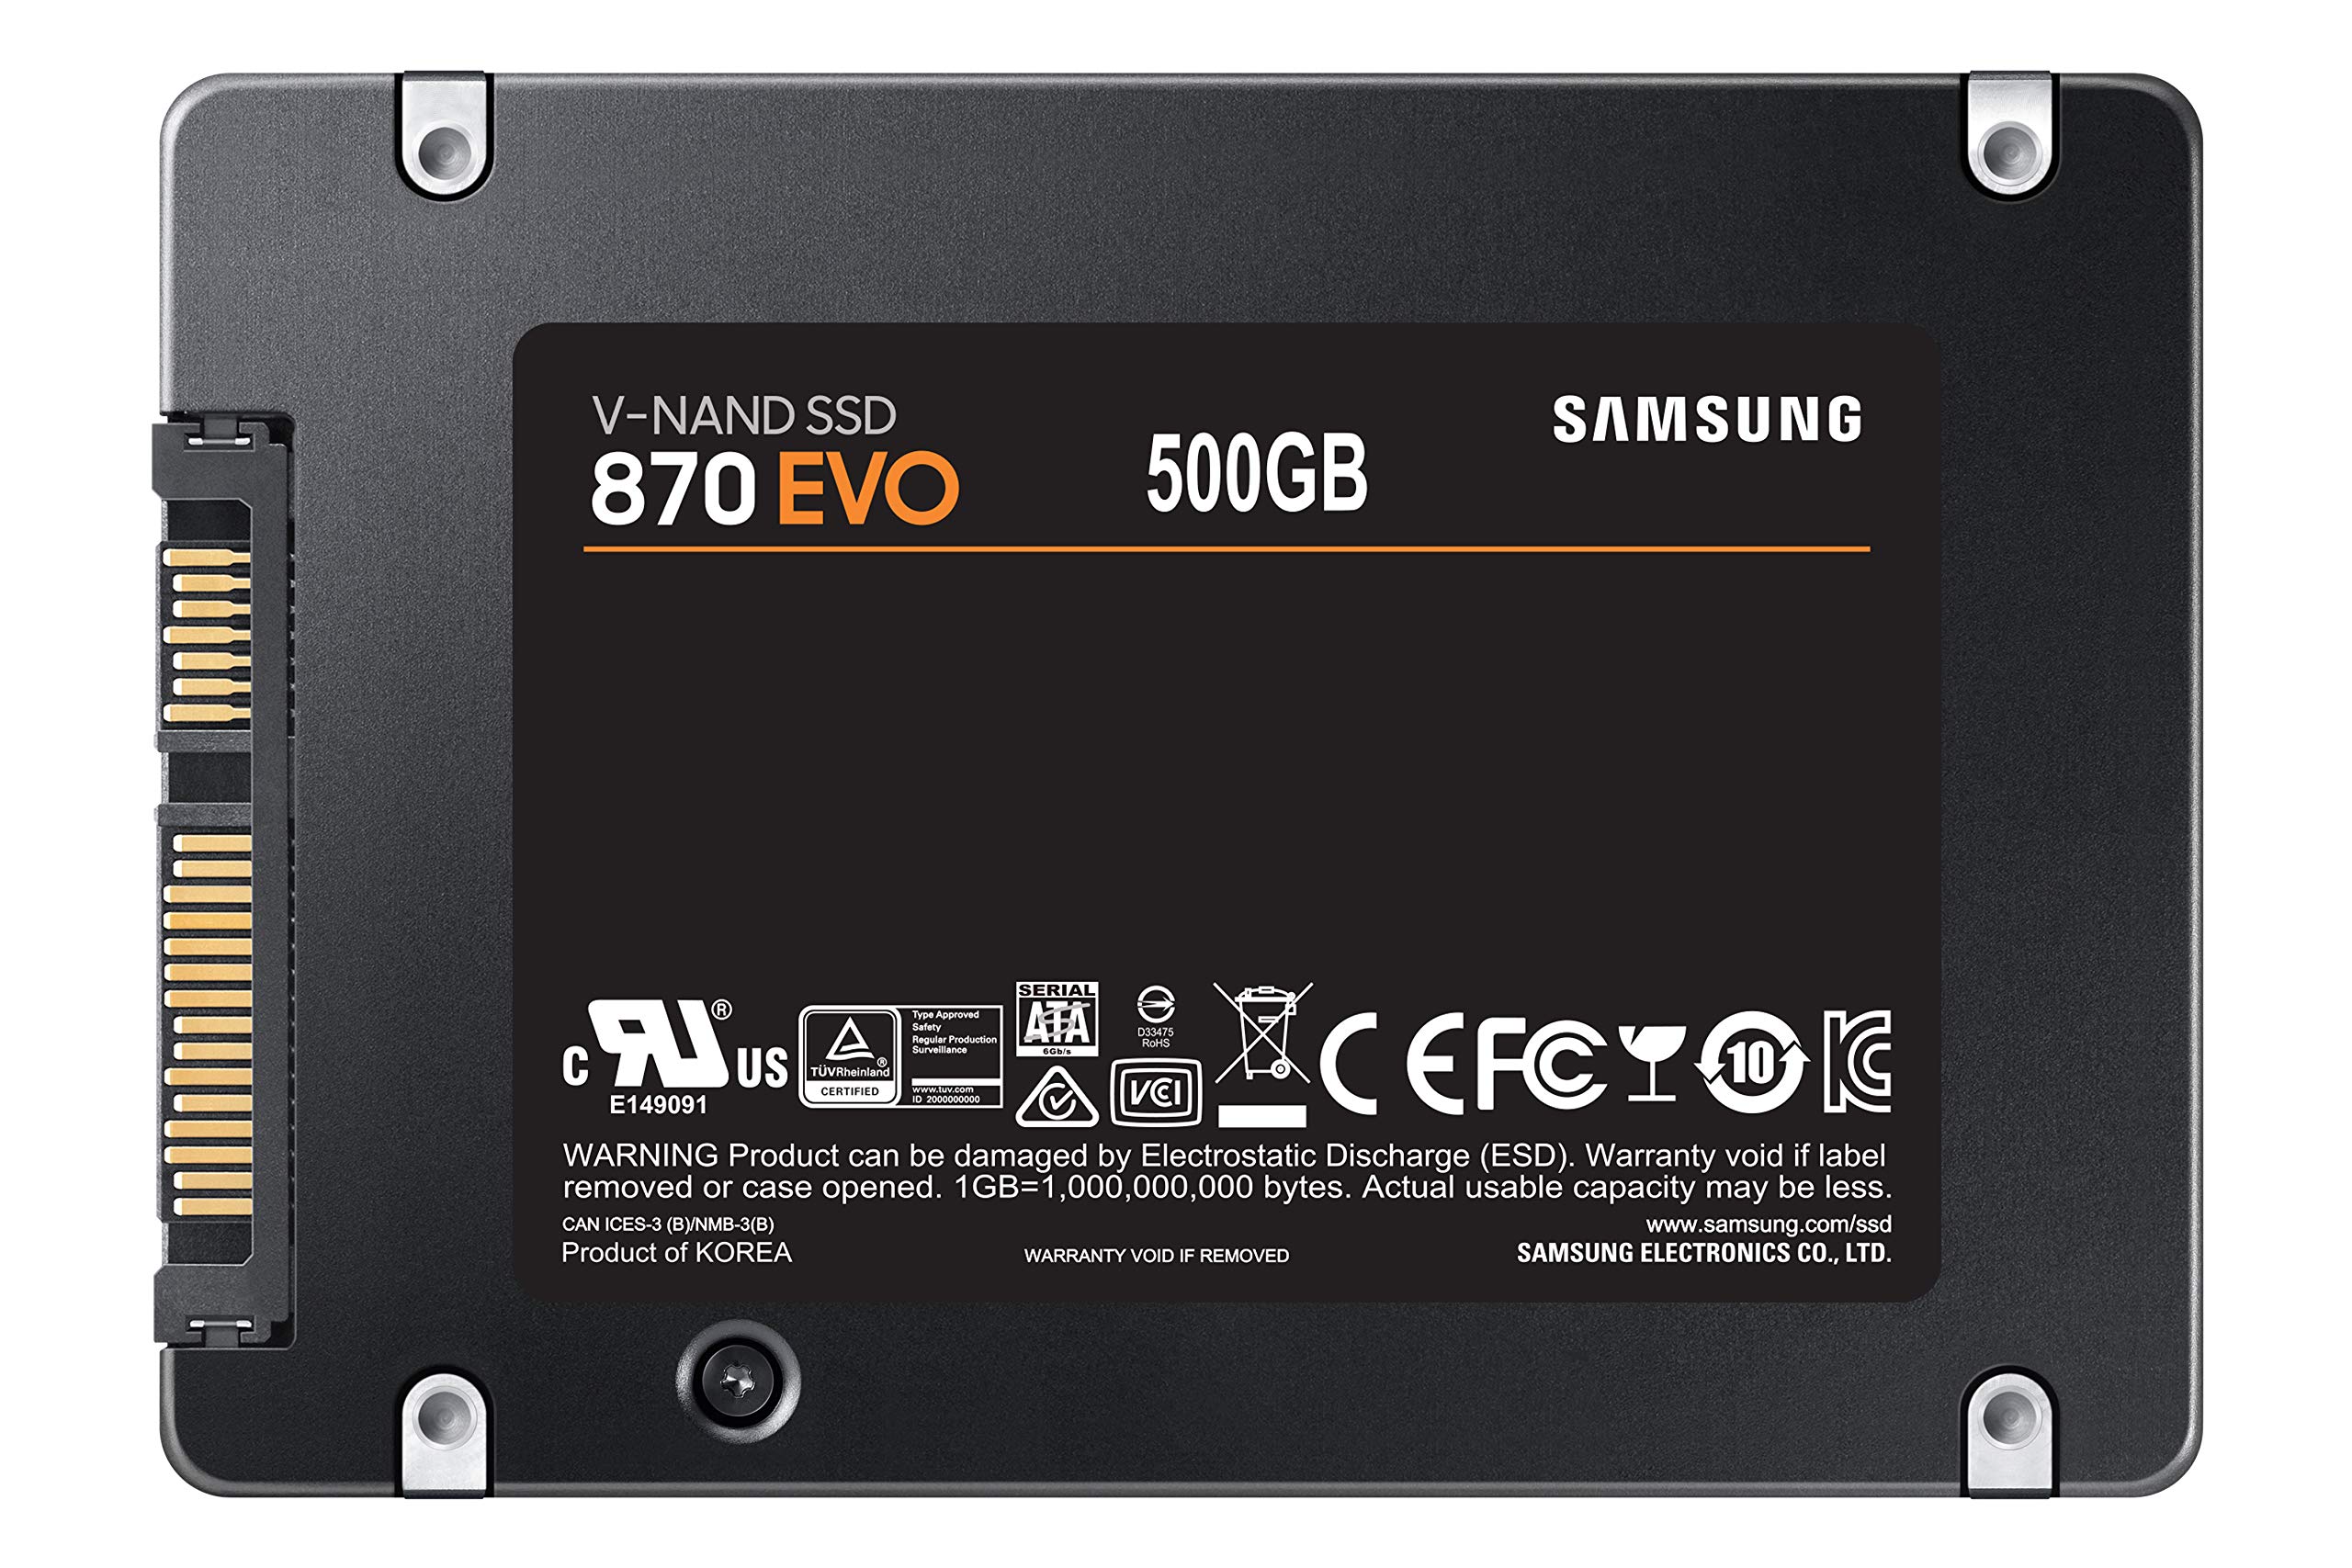 SAMSUNG 870 EVO SATA SSD 500GB 2.5” Internal Solid State Drive, Upgrade PC or Laptop Memory and Storage for IT Pros, Creators, Everyday Users, MZ-77E500B/AM